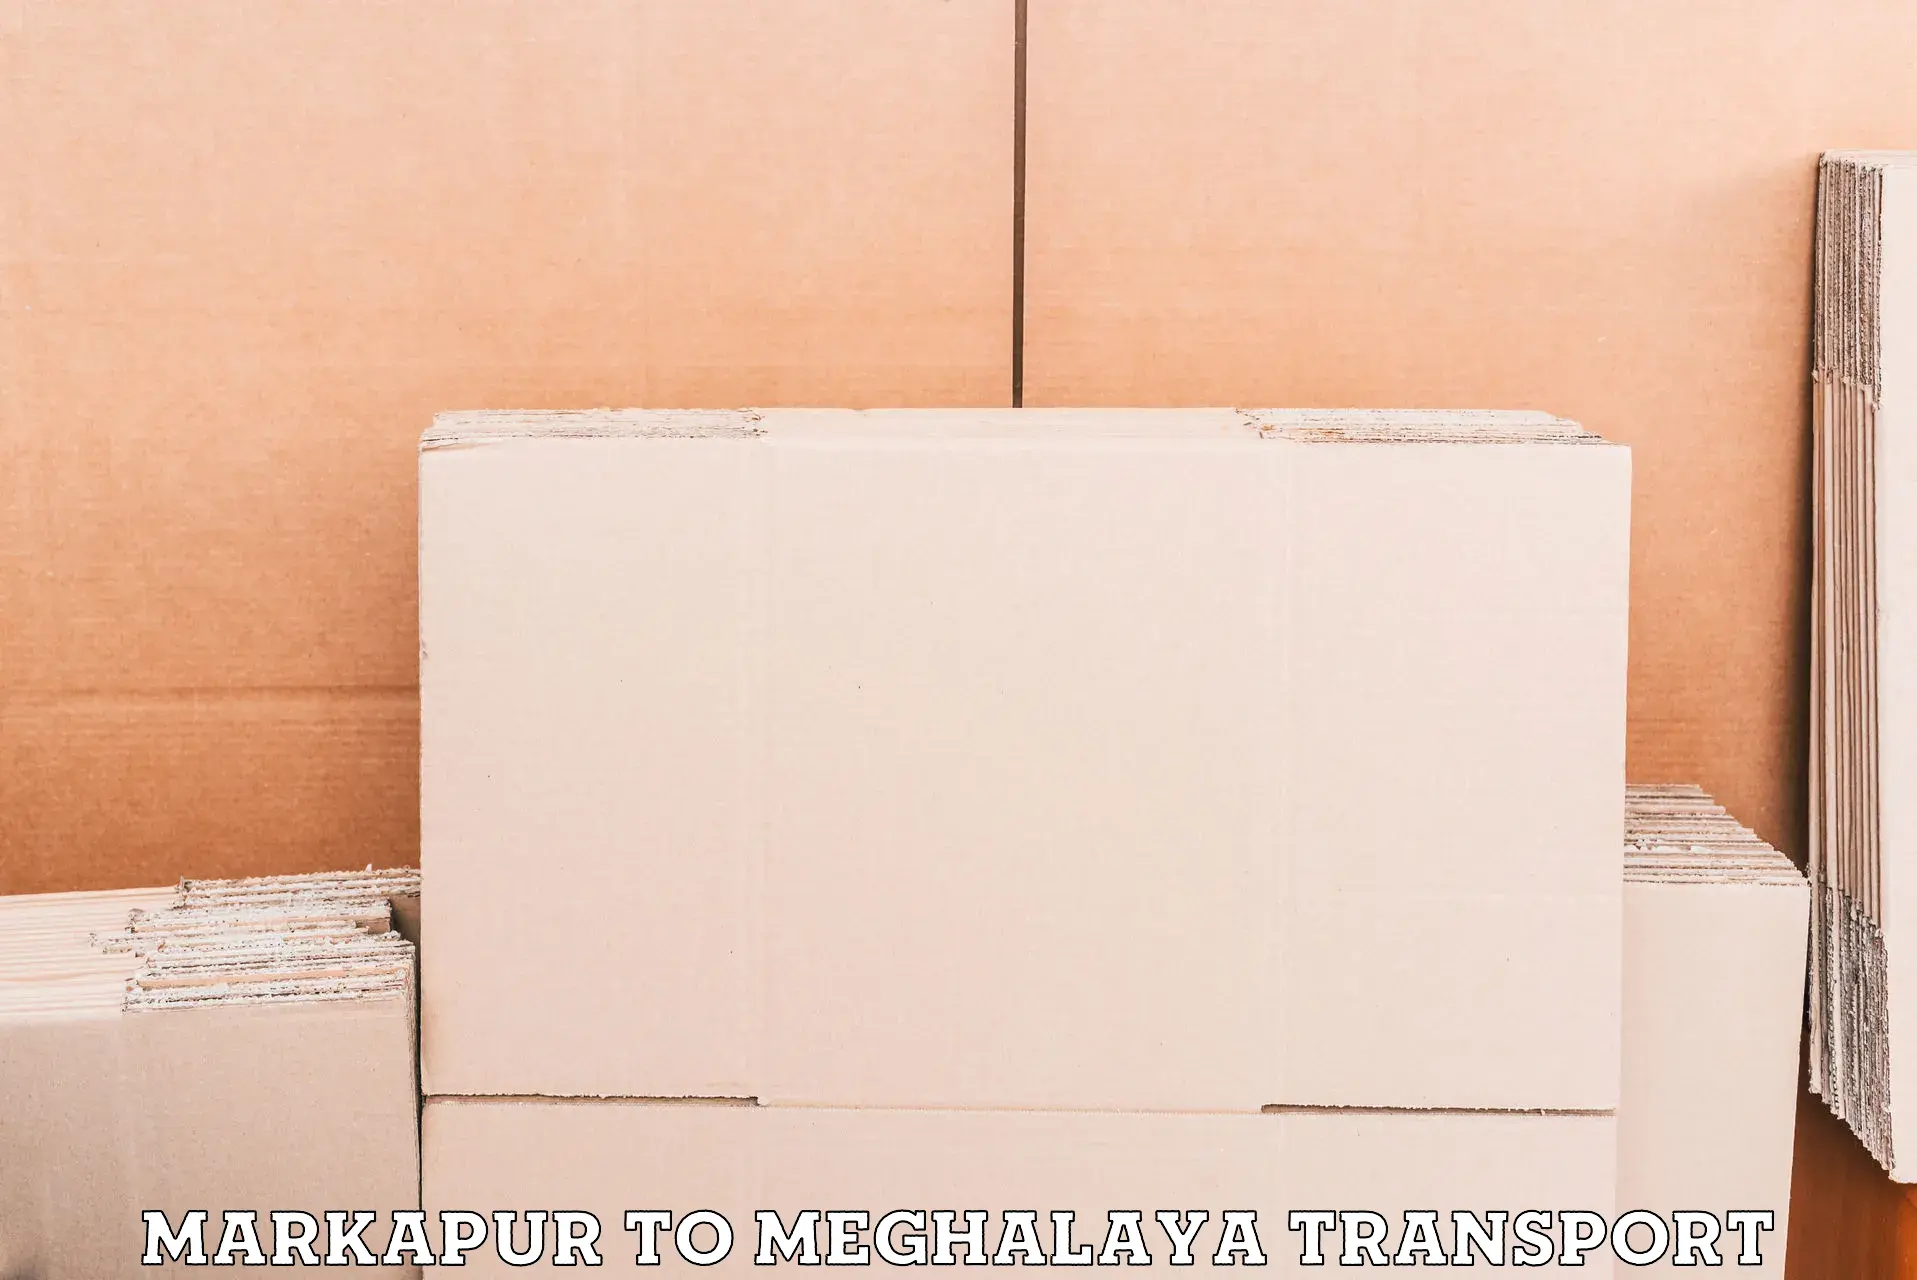 Transport bike from one state to another Markapur to Meghalaya